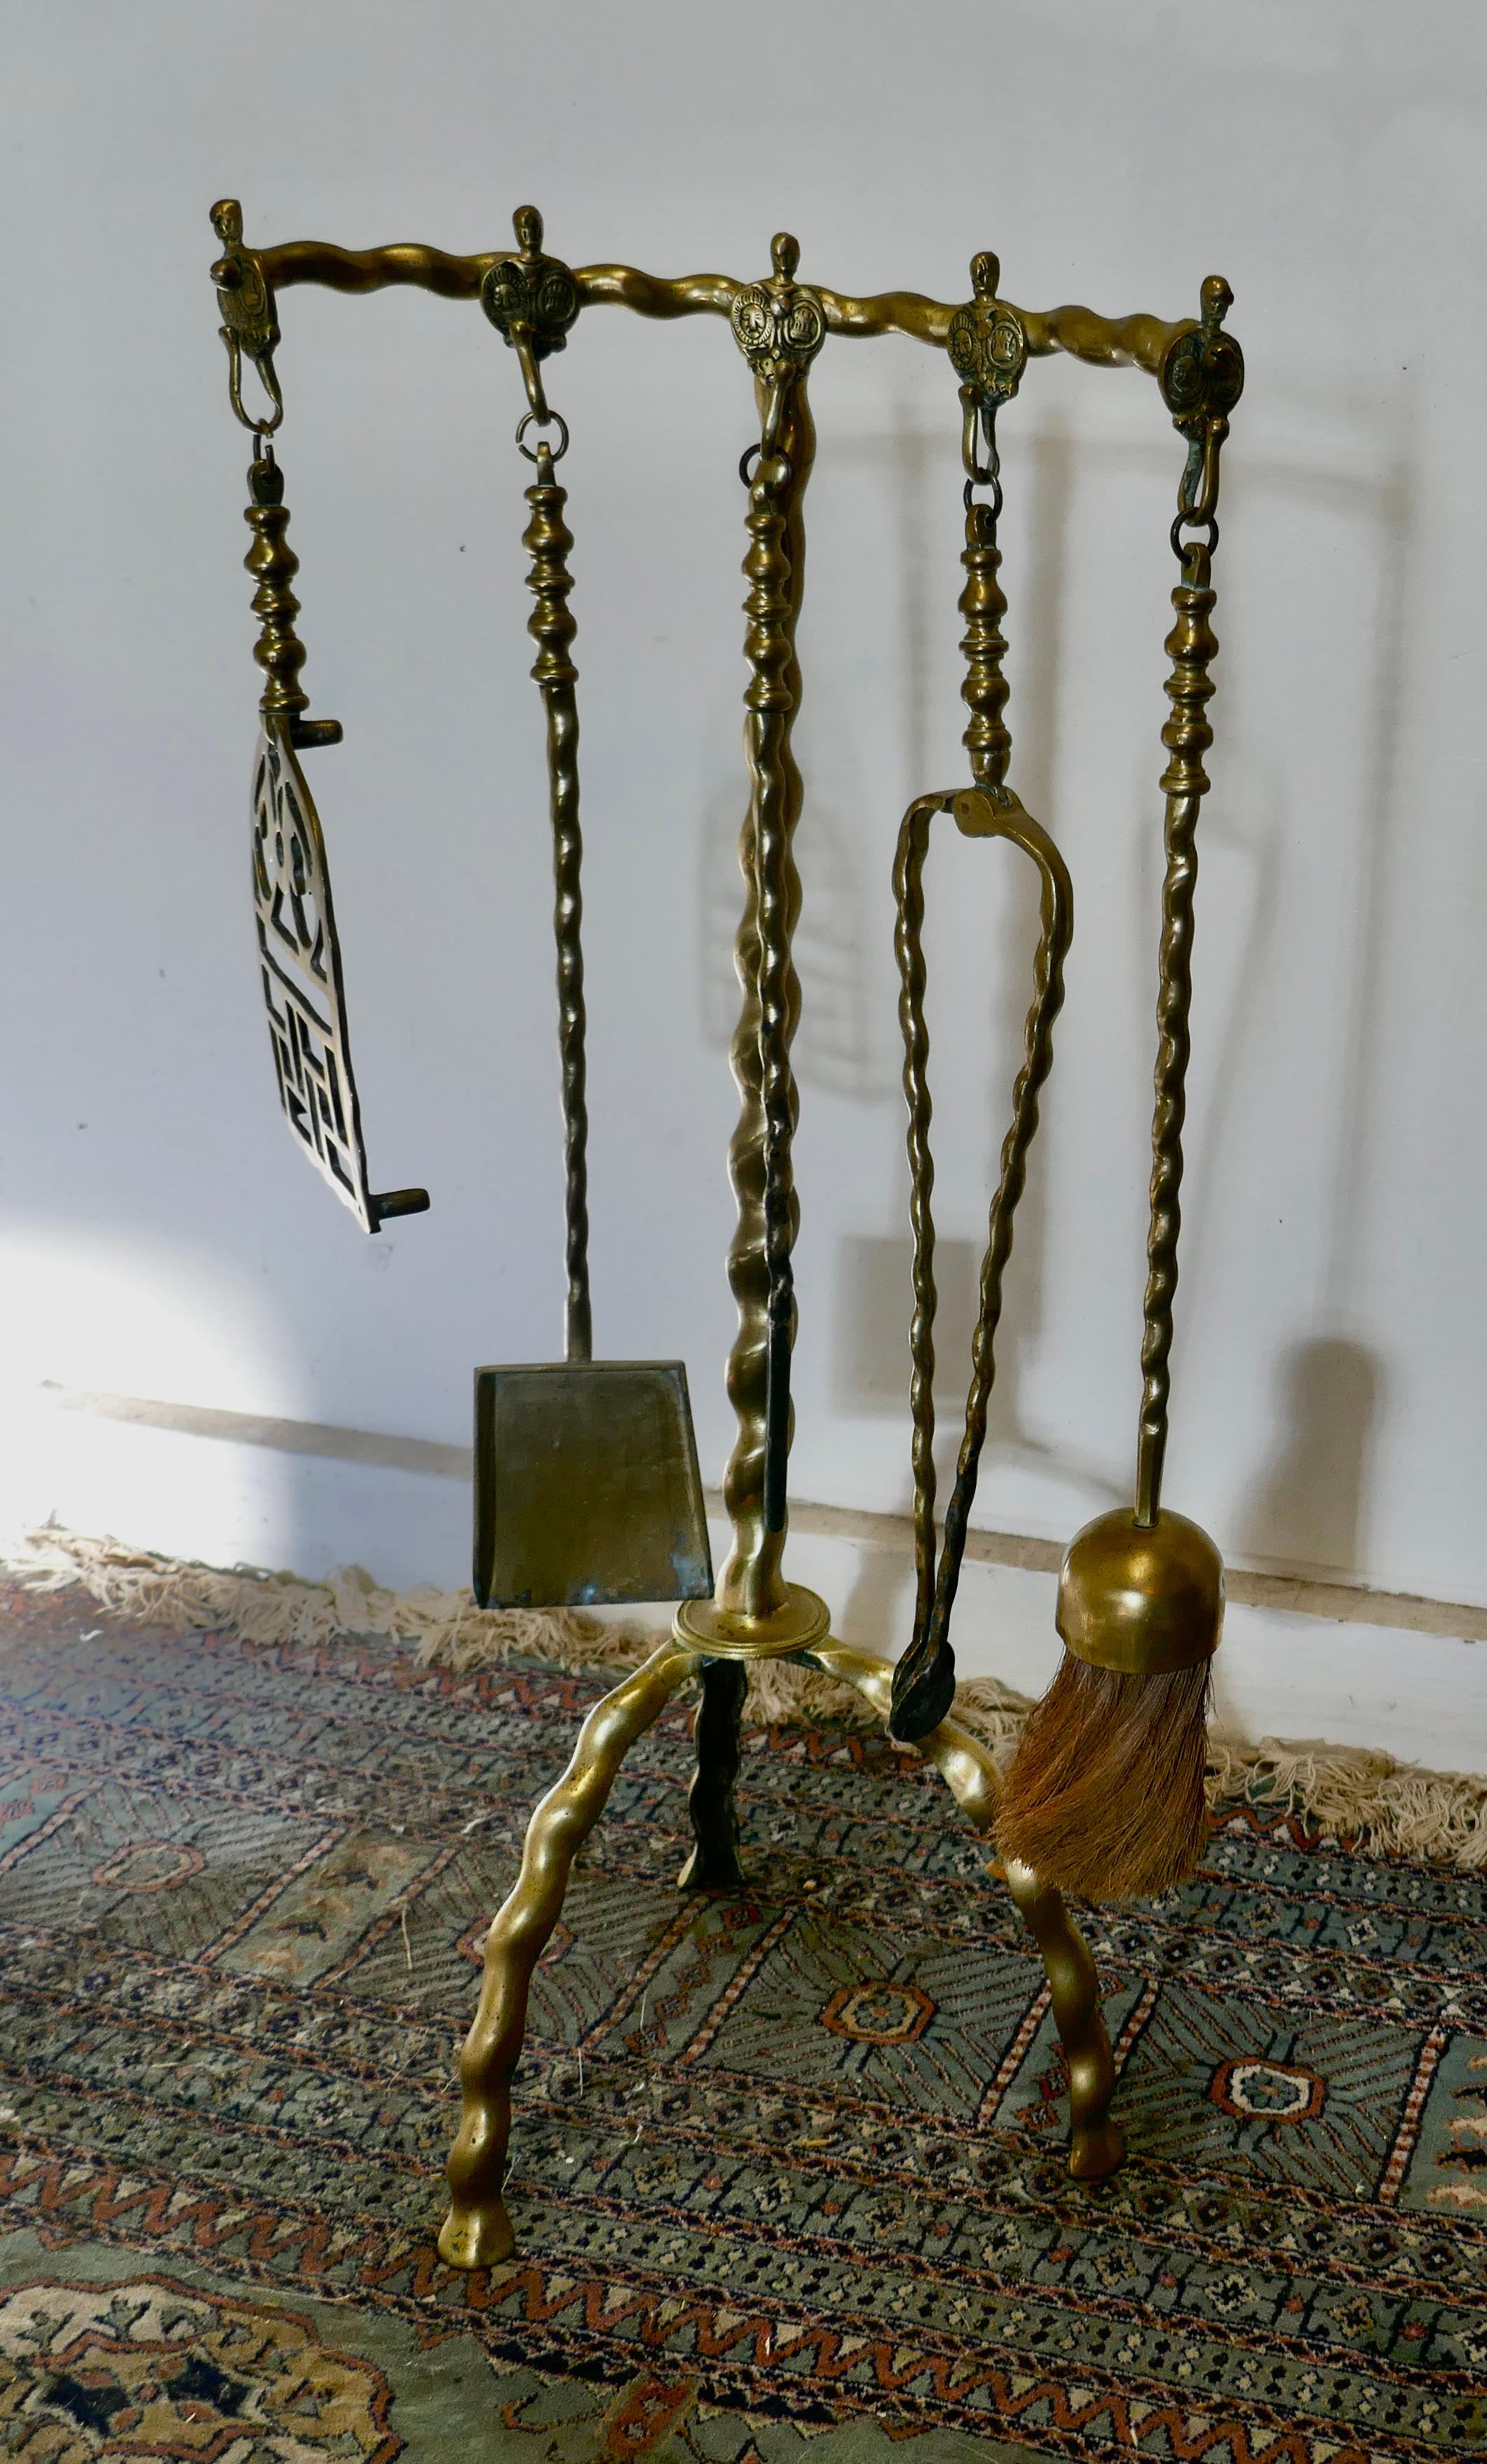 Unusual brass fireside companion set, 5 fireside tools

This is a long handled set on its own tall curved stand, shovel, tongs, brush, trivet and poker 
The stand has twisted look, and the hooks are decorated with gothic motifs
The stand 31”